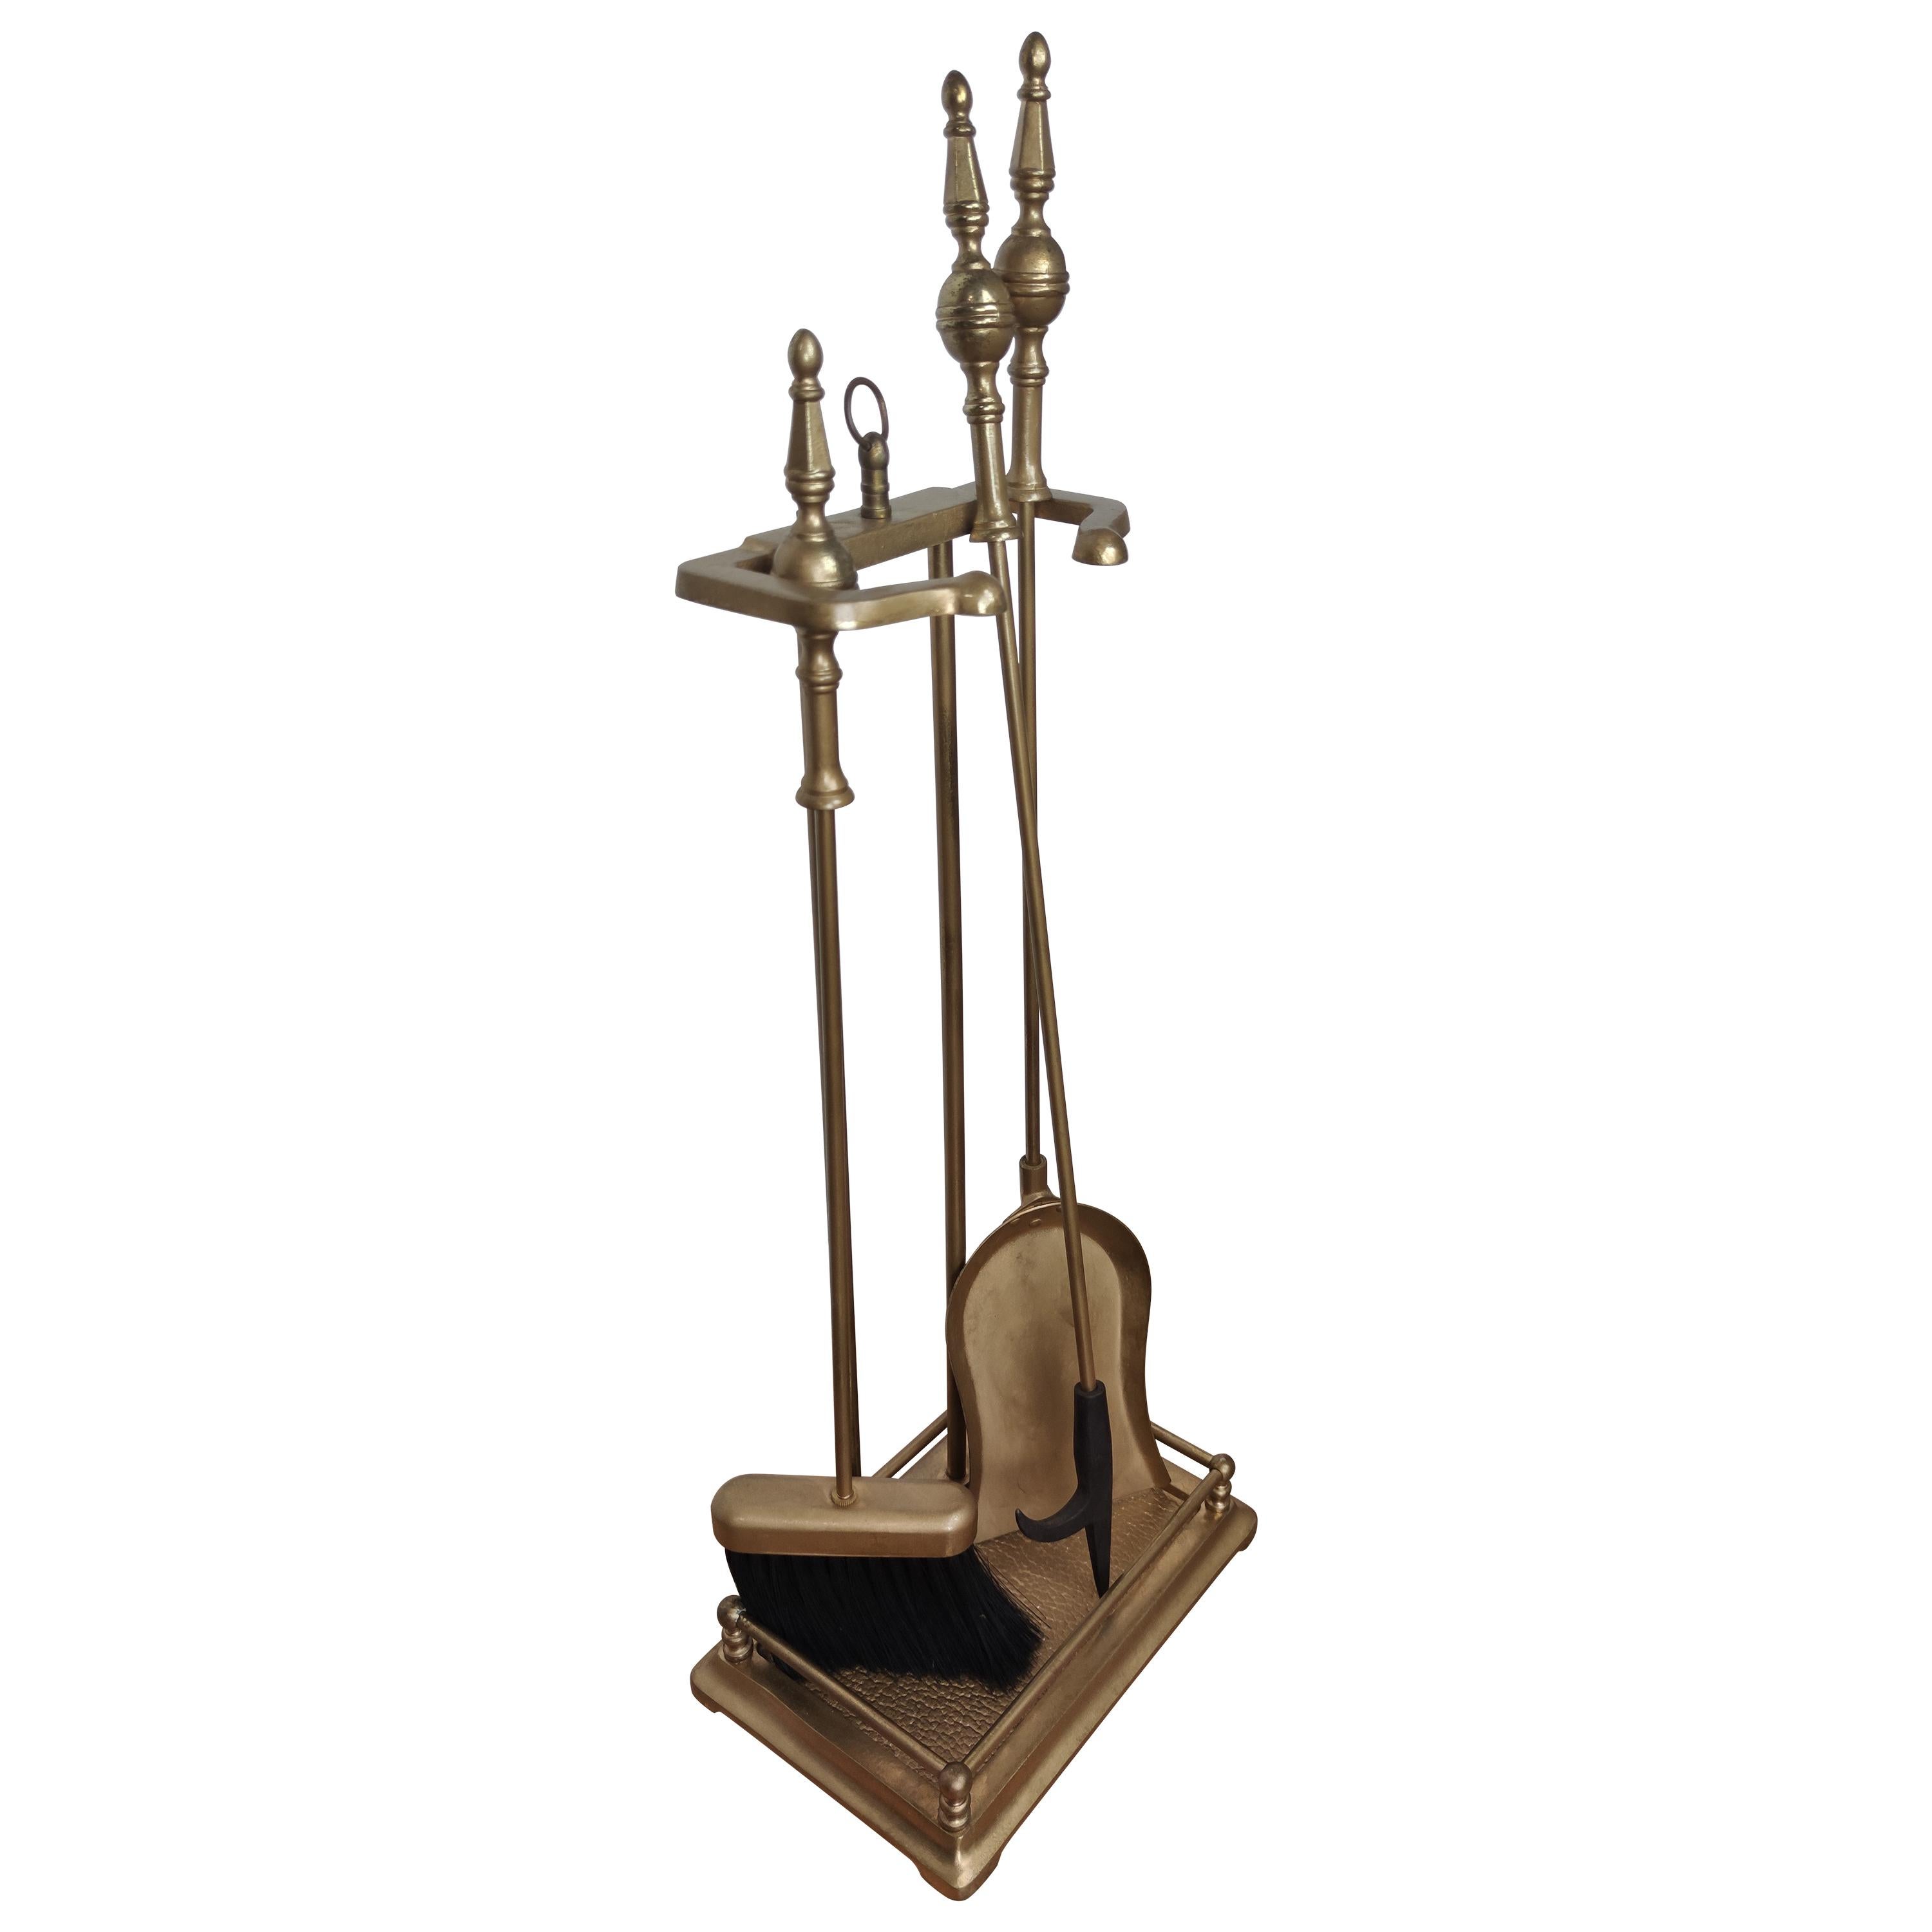 Three-Piece Brass Vintage Fire Tool Set with Stand